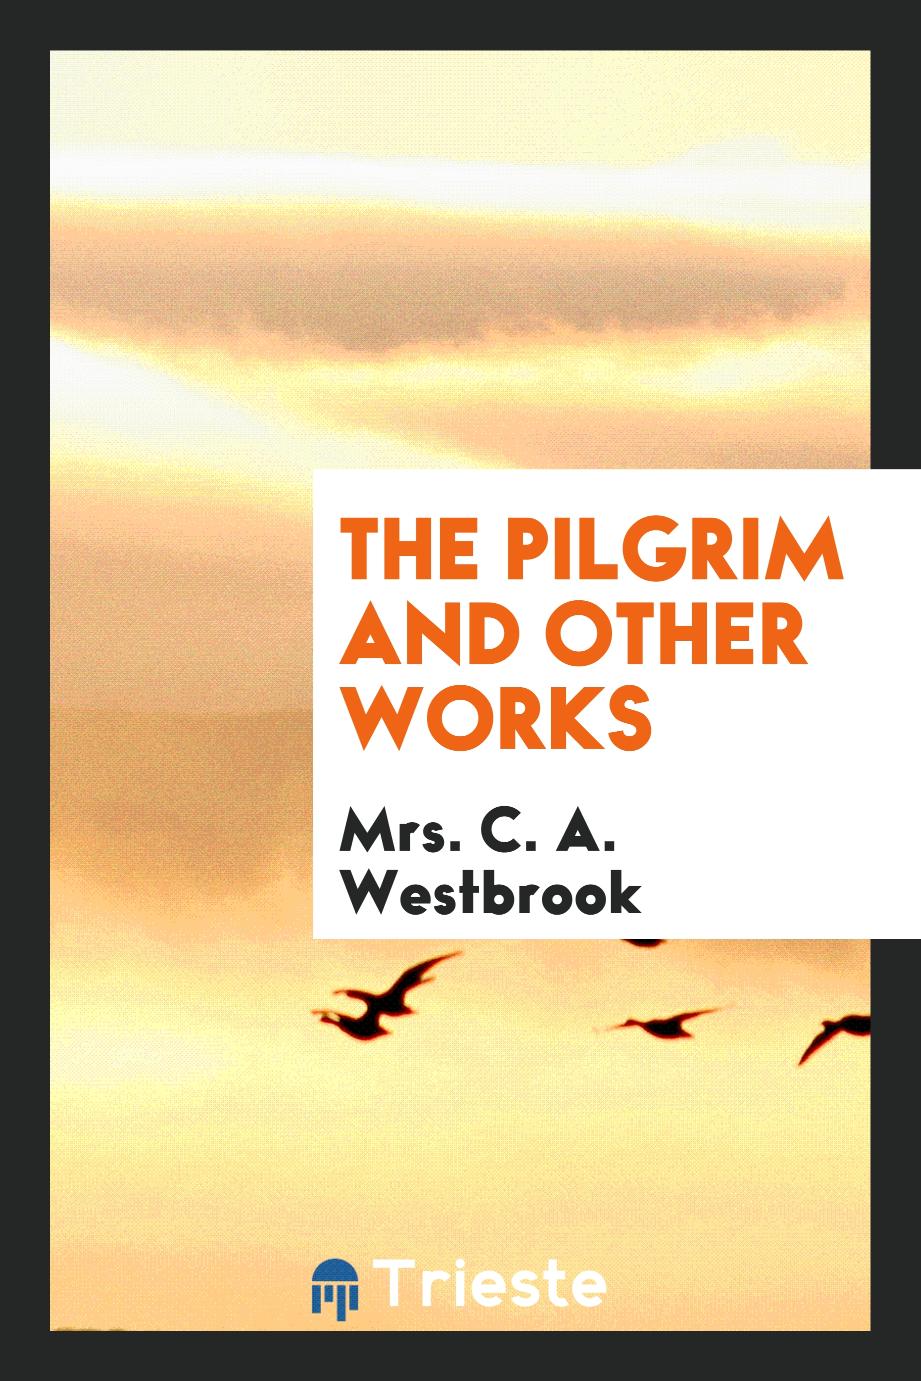 The Pilgrim and Other Works